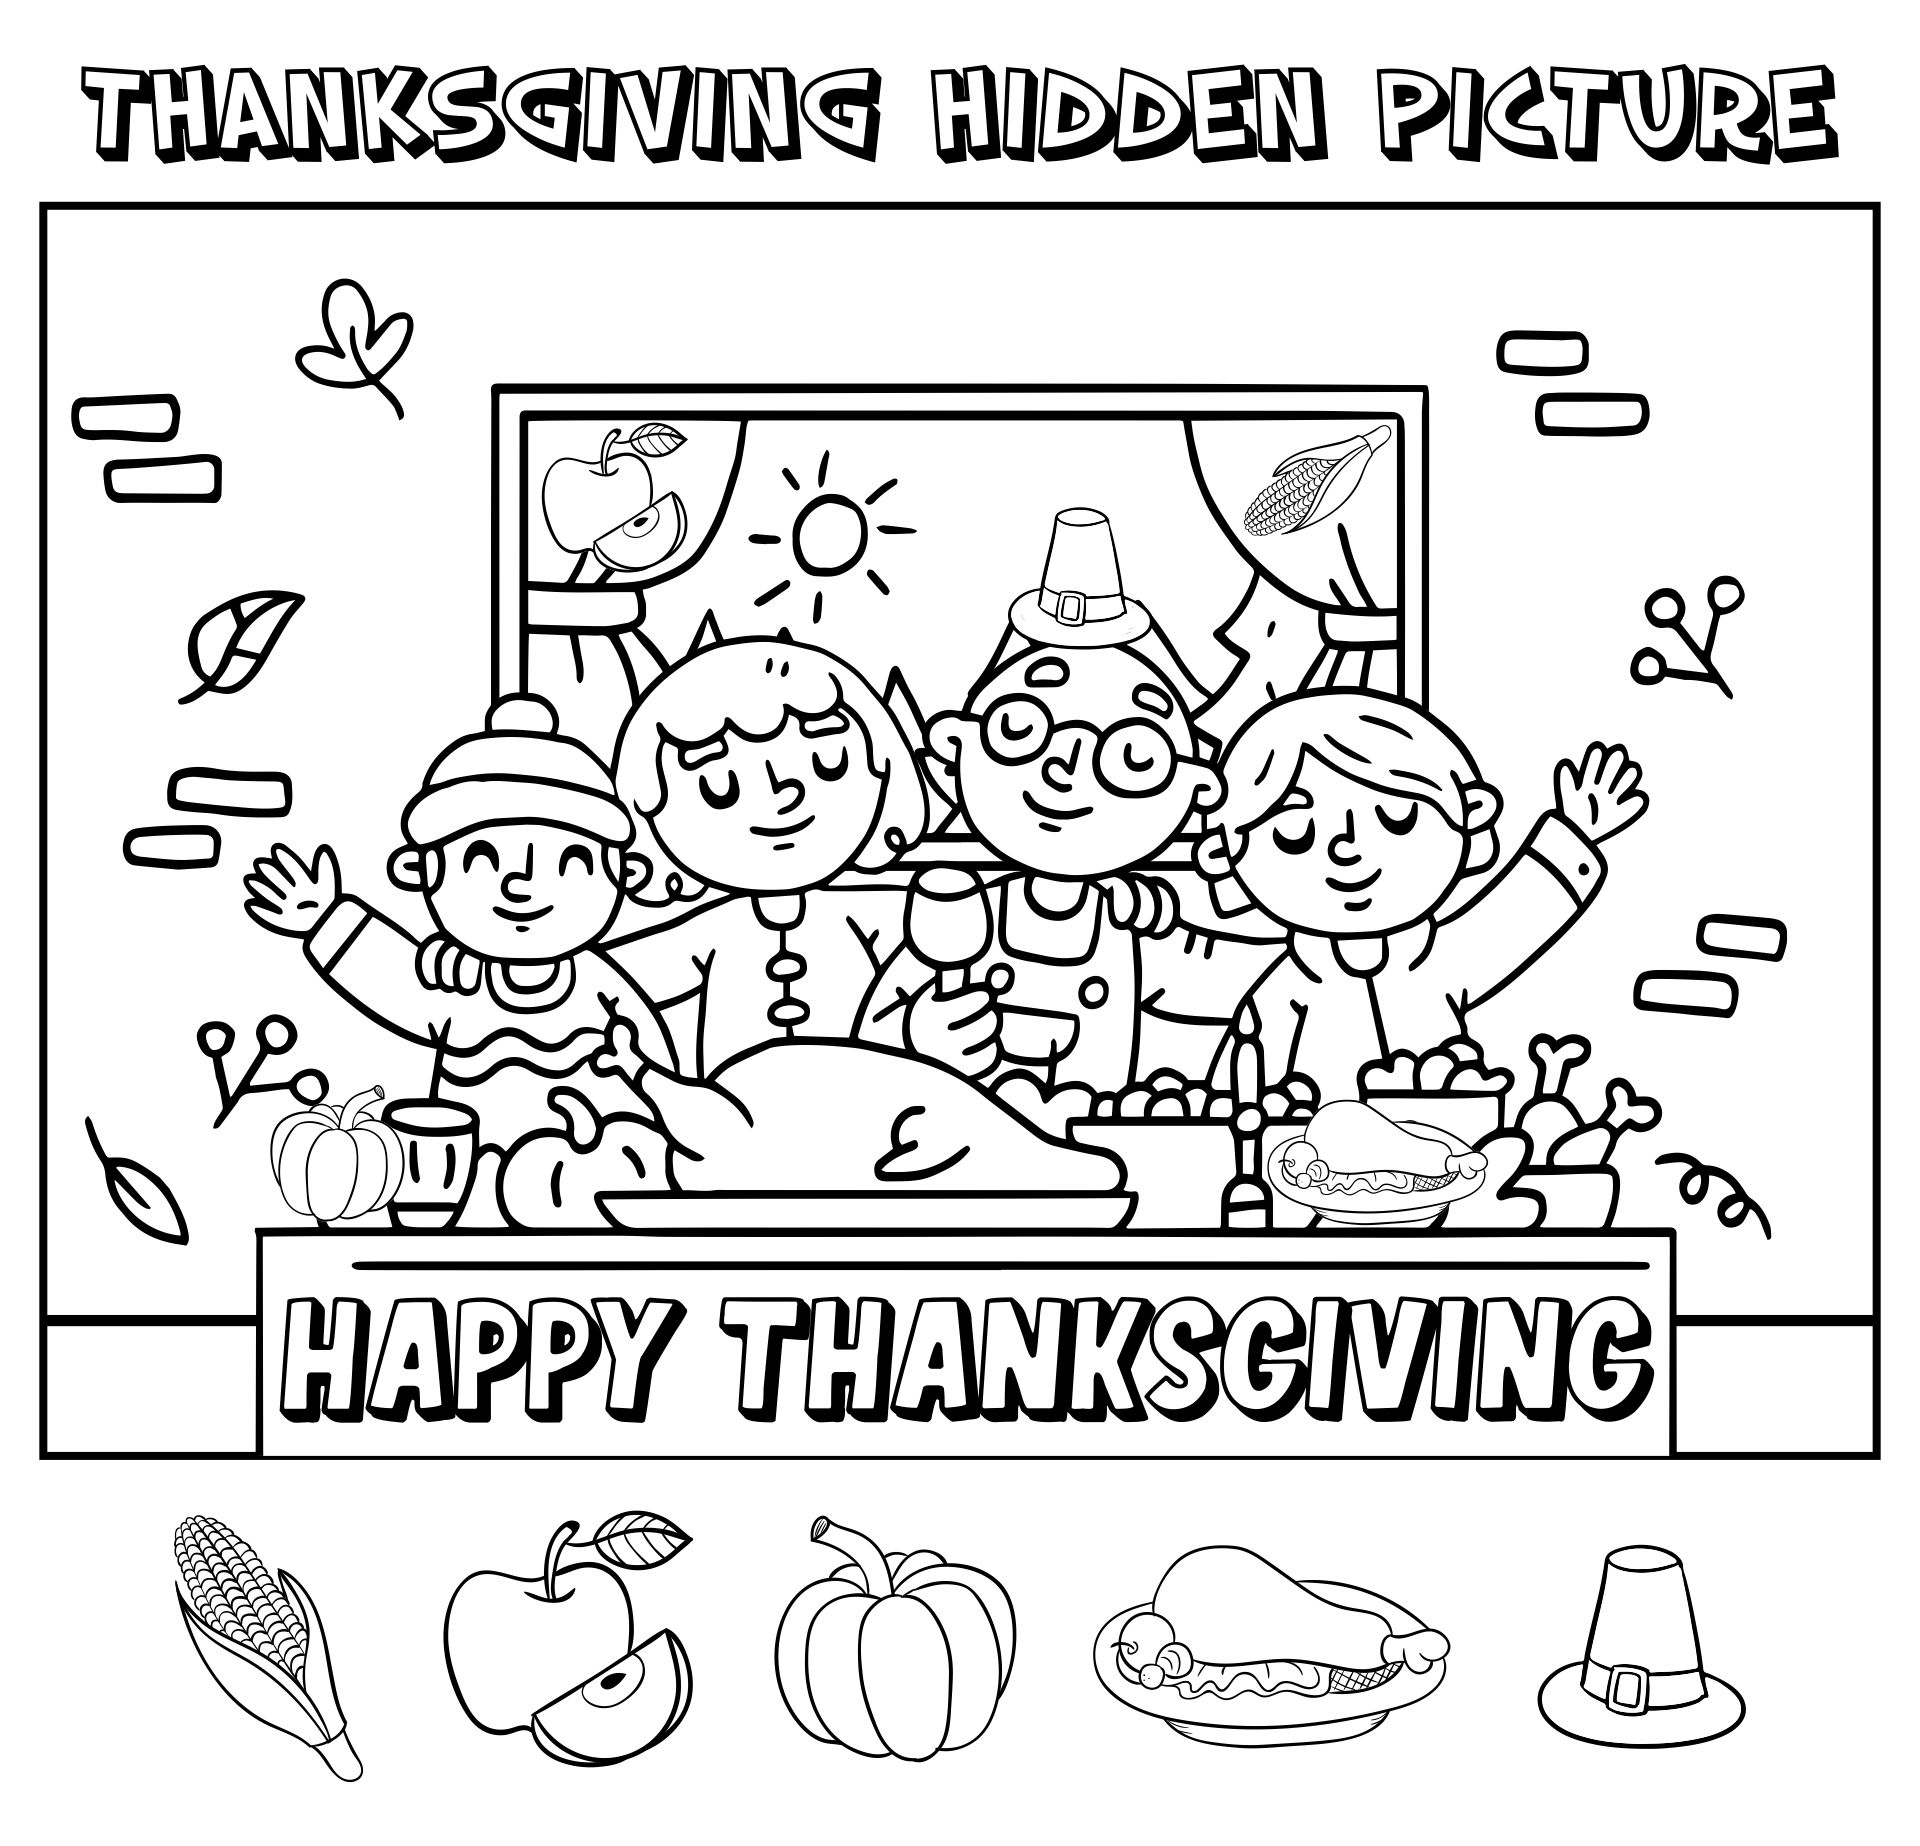 thanksgiving-hidden-objects-printable